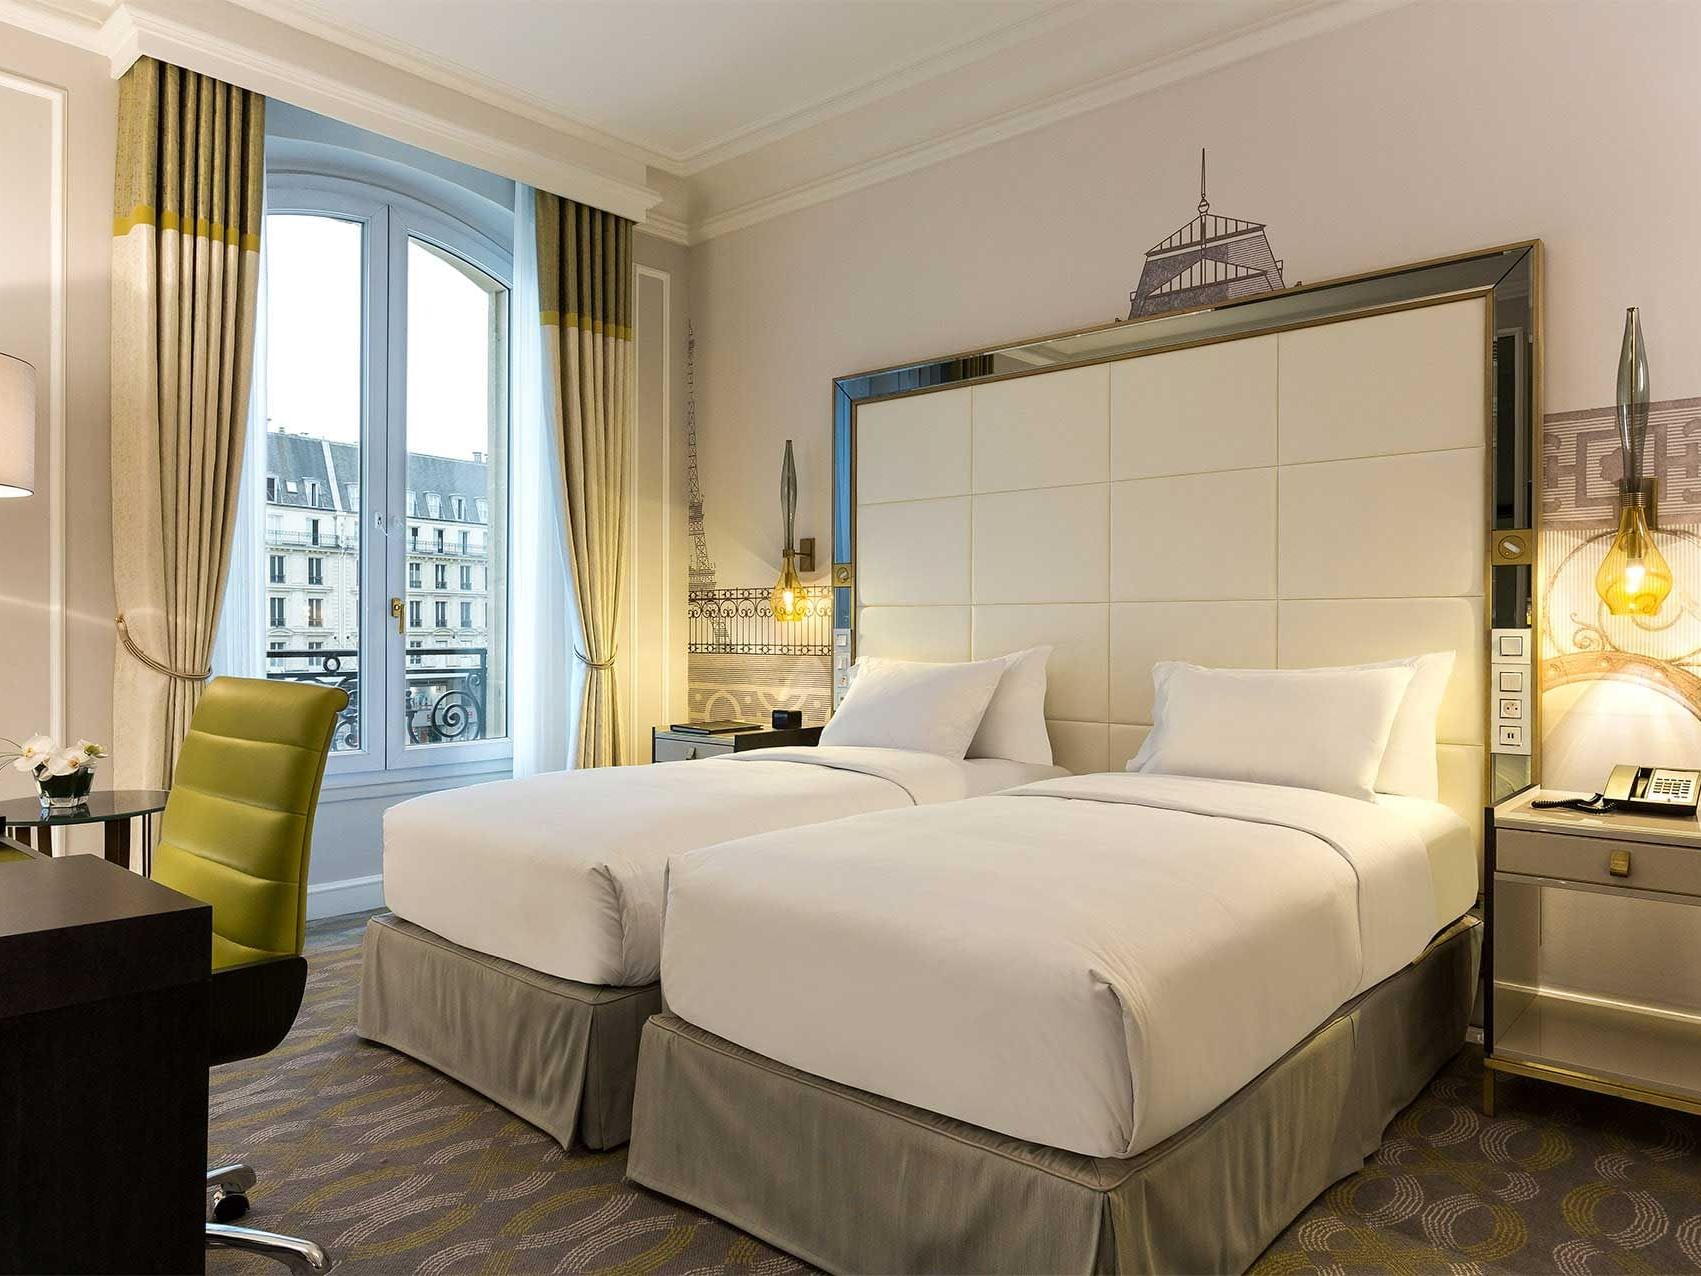 Bed & furniture in Twin Deluxe Room at Hilton Paris Opera Hotel